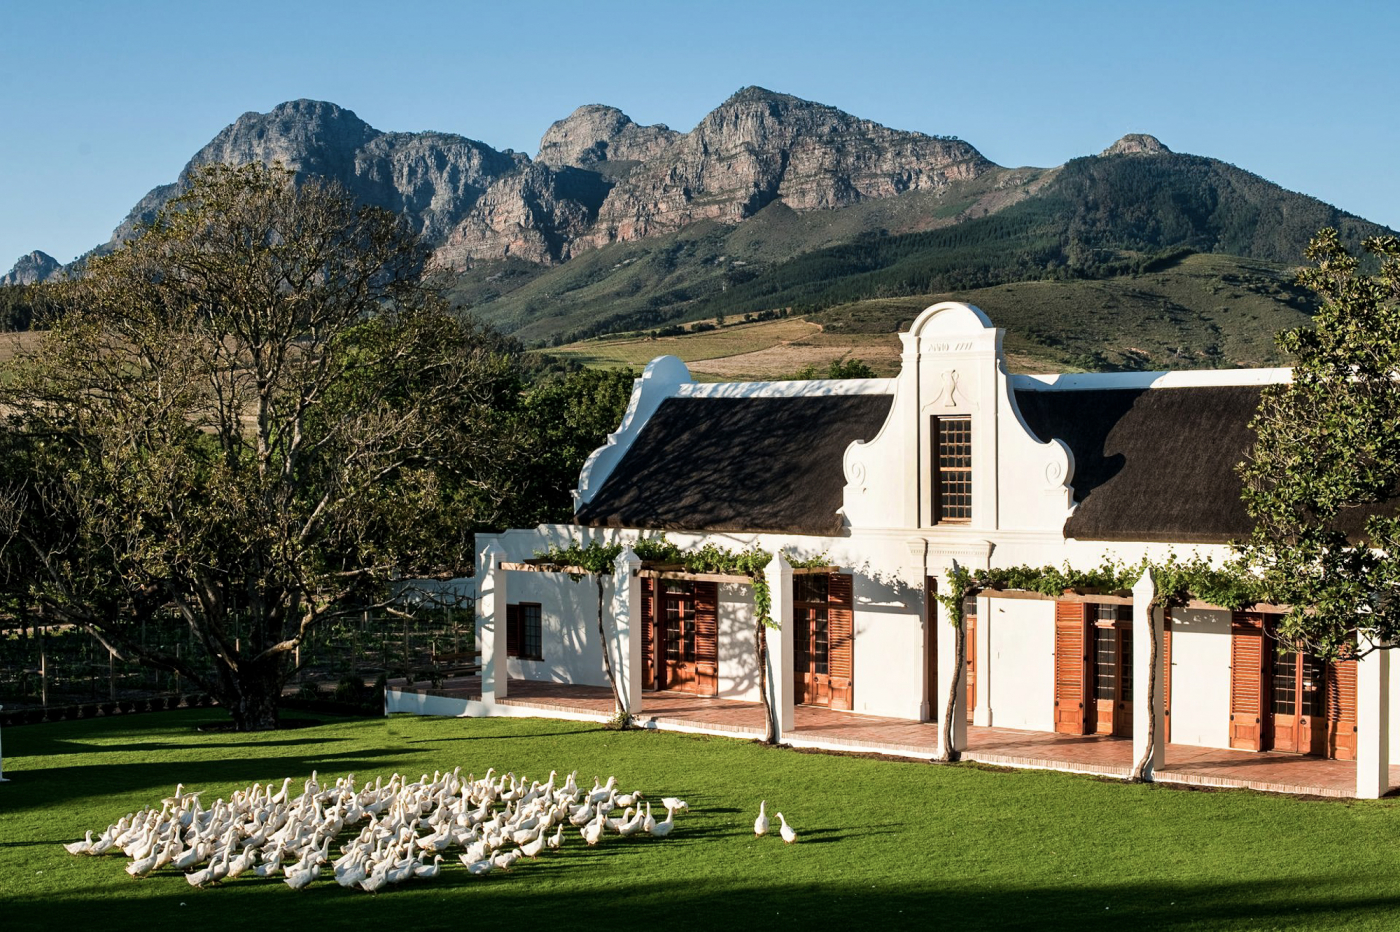 What’s wrong with Babylonstoren?